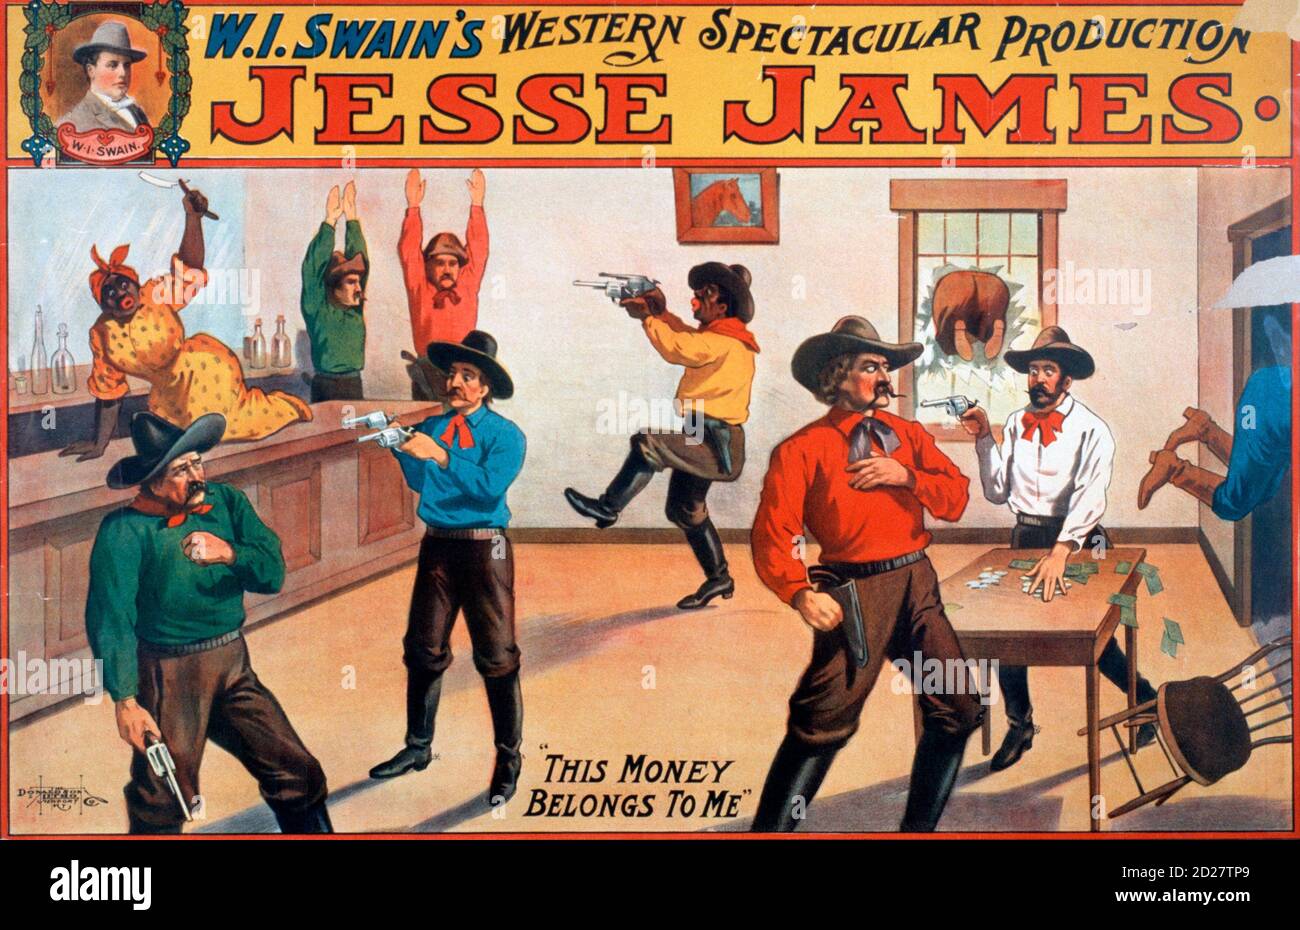 Theatrical poster for W.I. Swain's Western Spectacular Production with Jesse James, 1880s Stock Photo